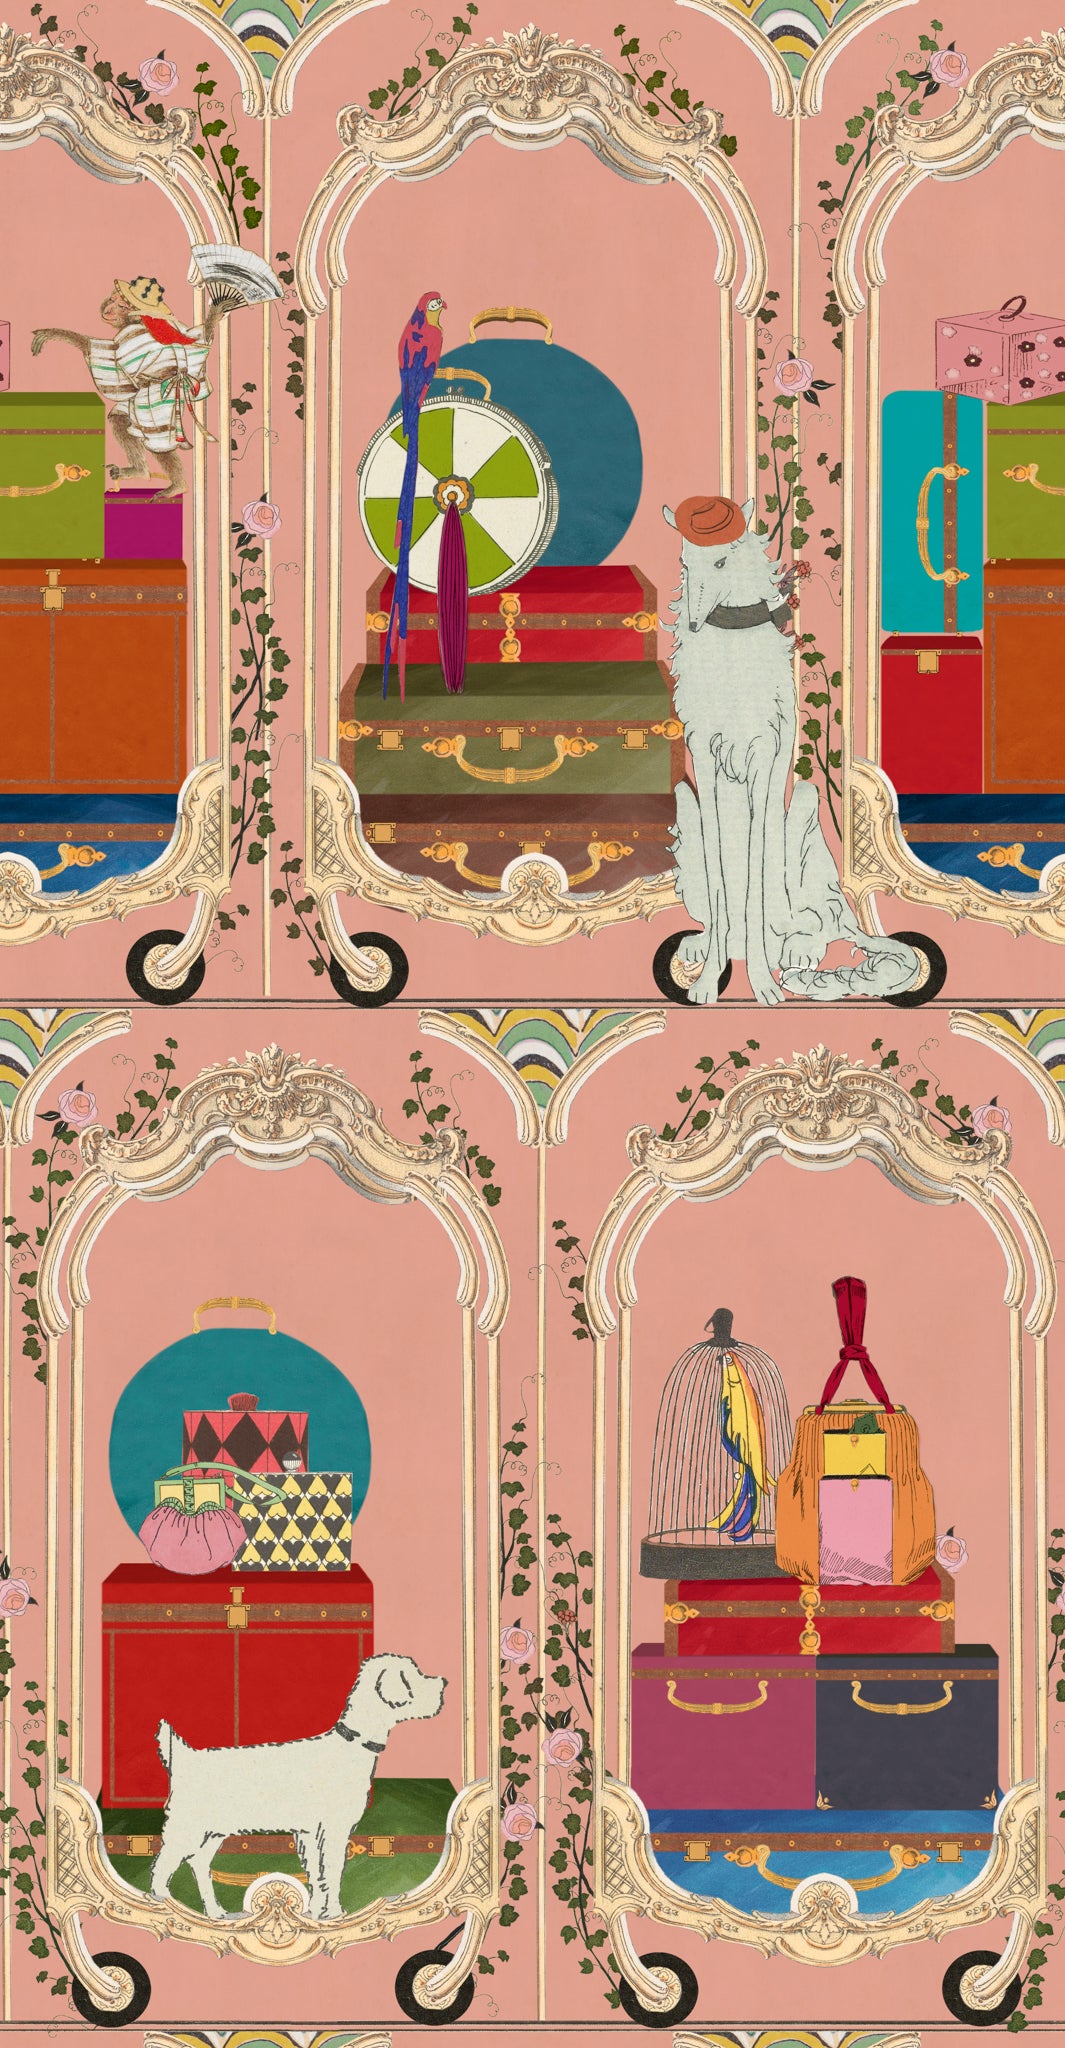 Mind-the-gap-oriental-express-wallpaper-Fancy-trip-ornate-carved-luggage-birdcages-suitcases-travel-inspired-eastern-romanytic-drpets-orient-journey-colourful-scene-pink